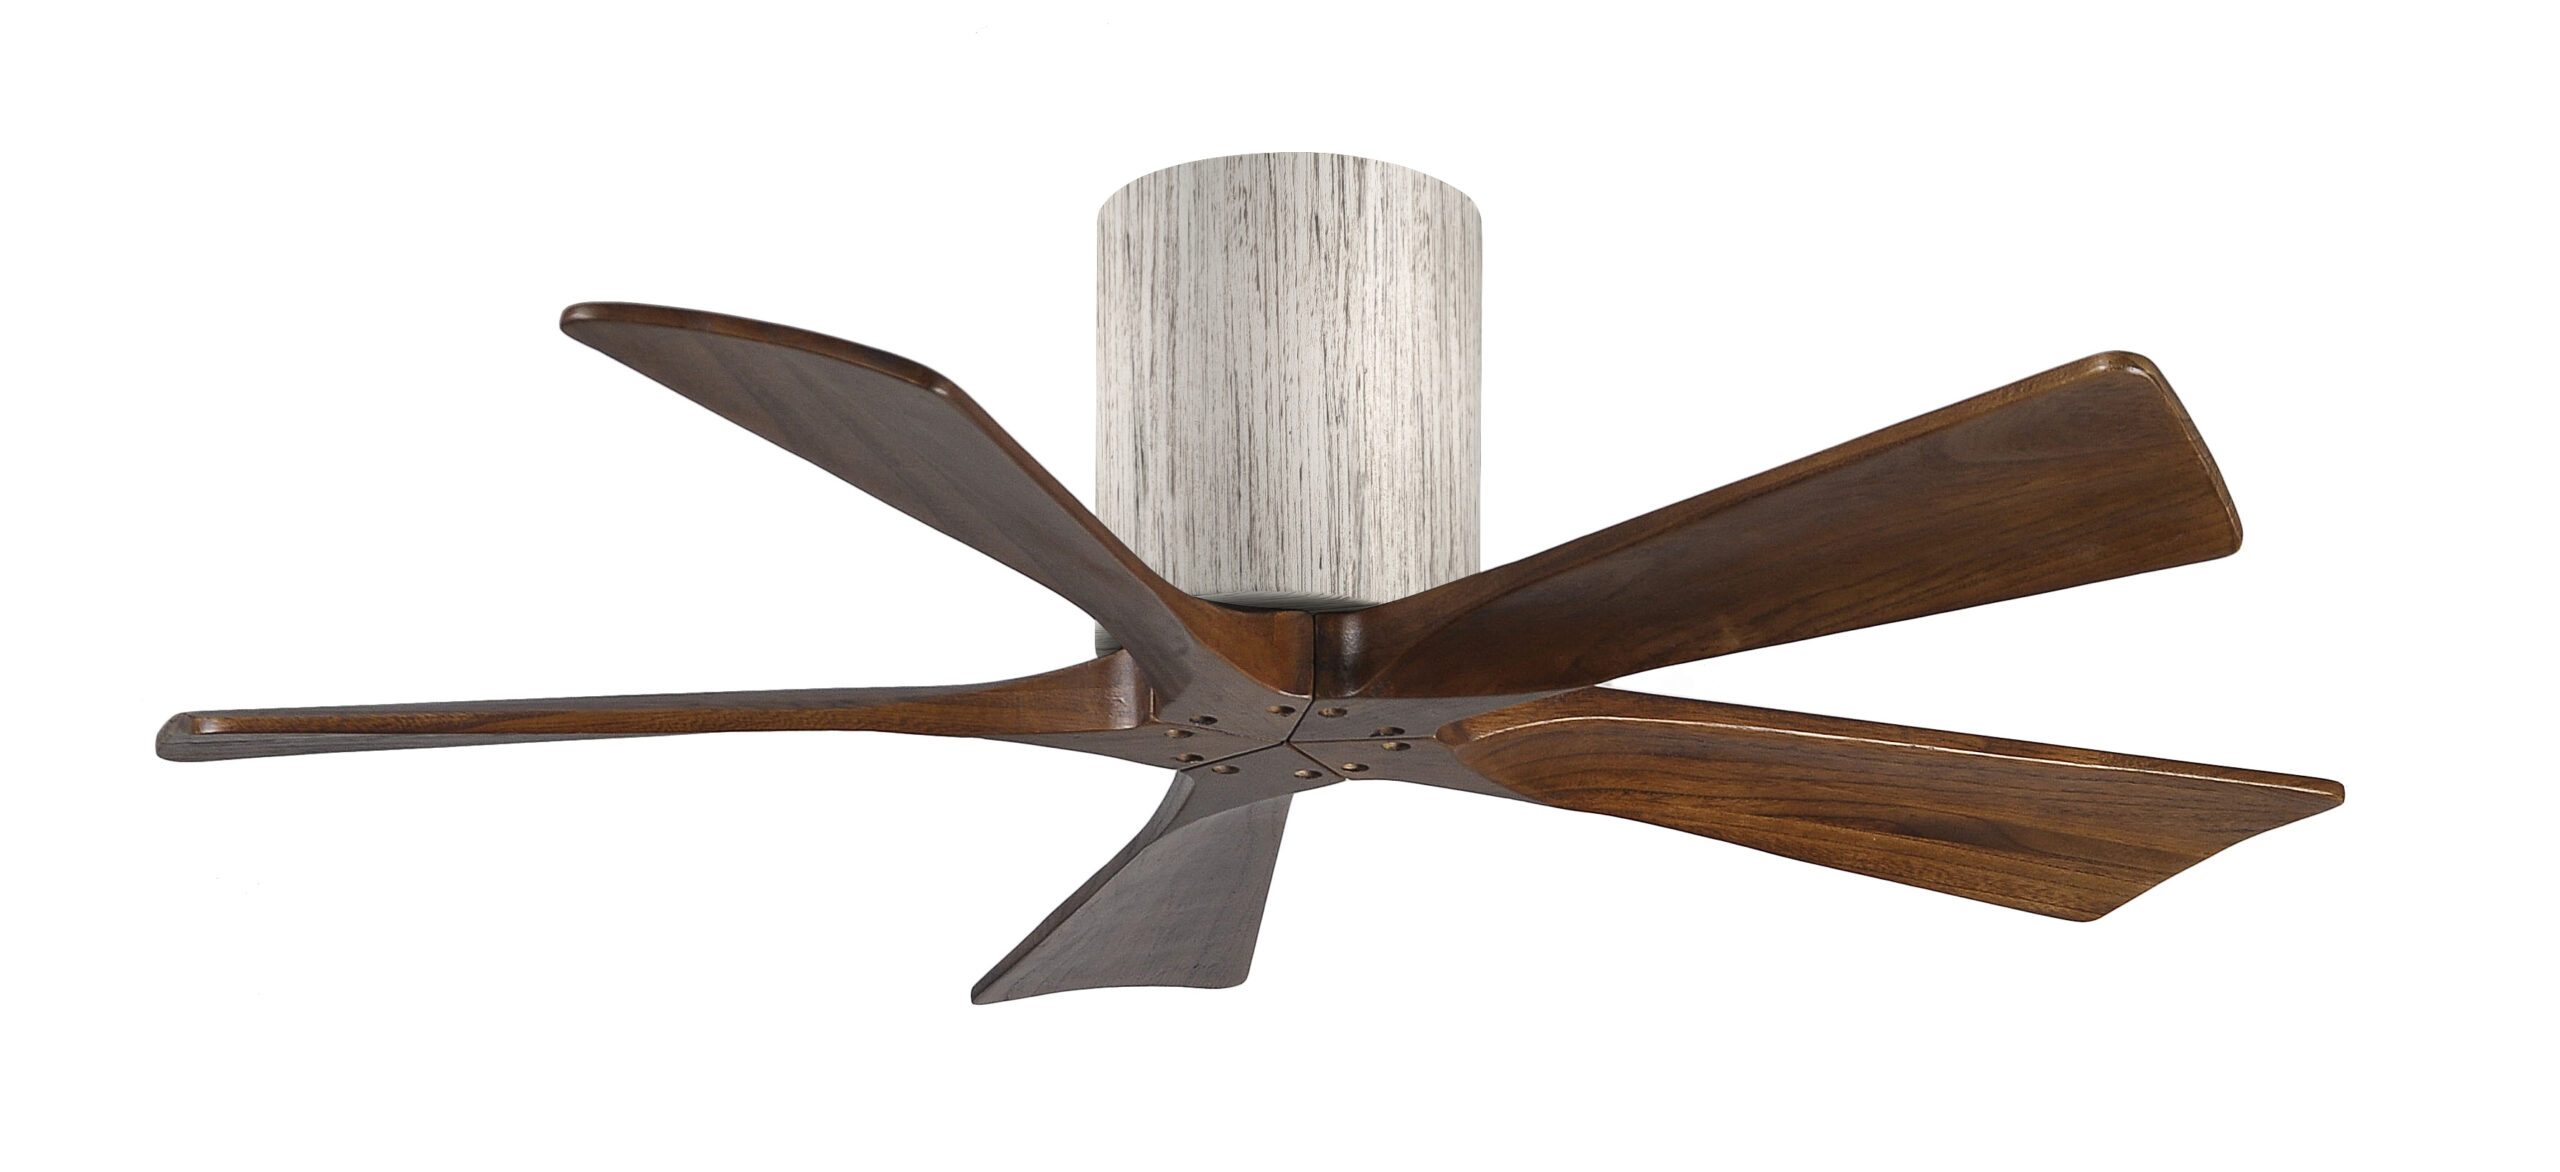 Irene-5H Ceiling Fan in Barn Wood Finish with 42